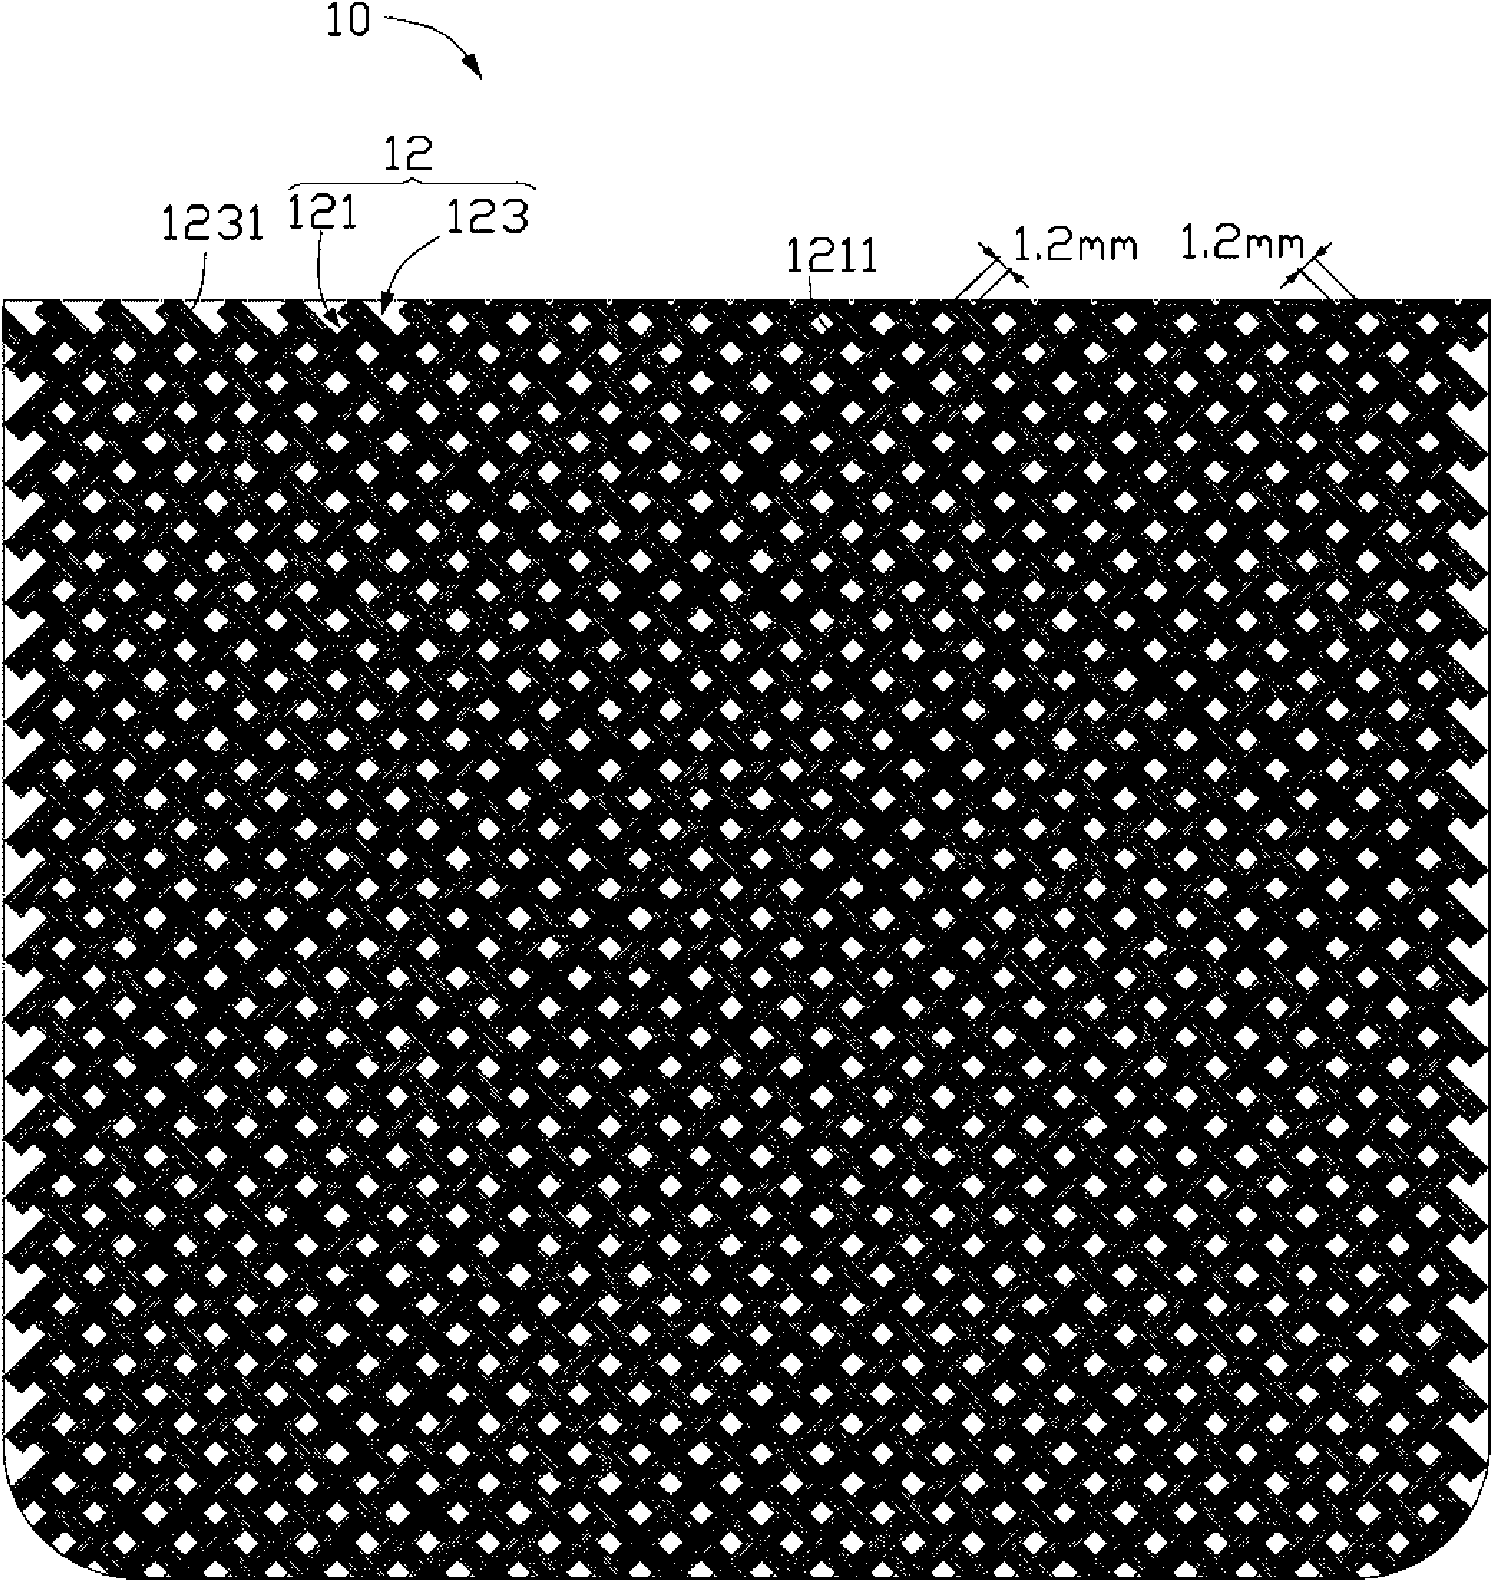 Shell having knitted patterns and manufacturing method thereof